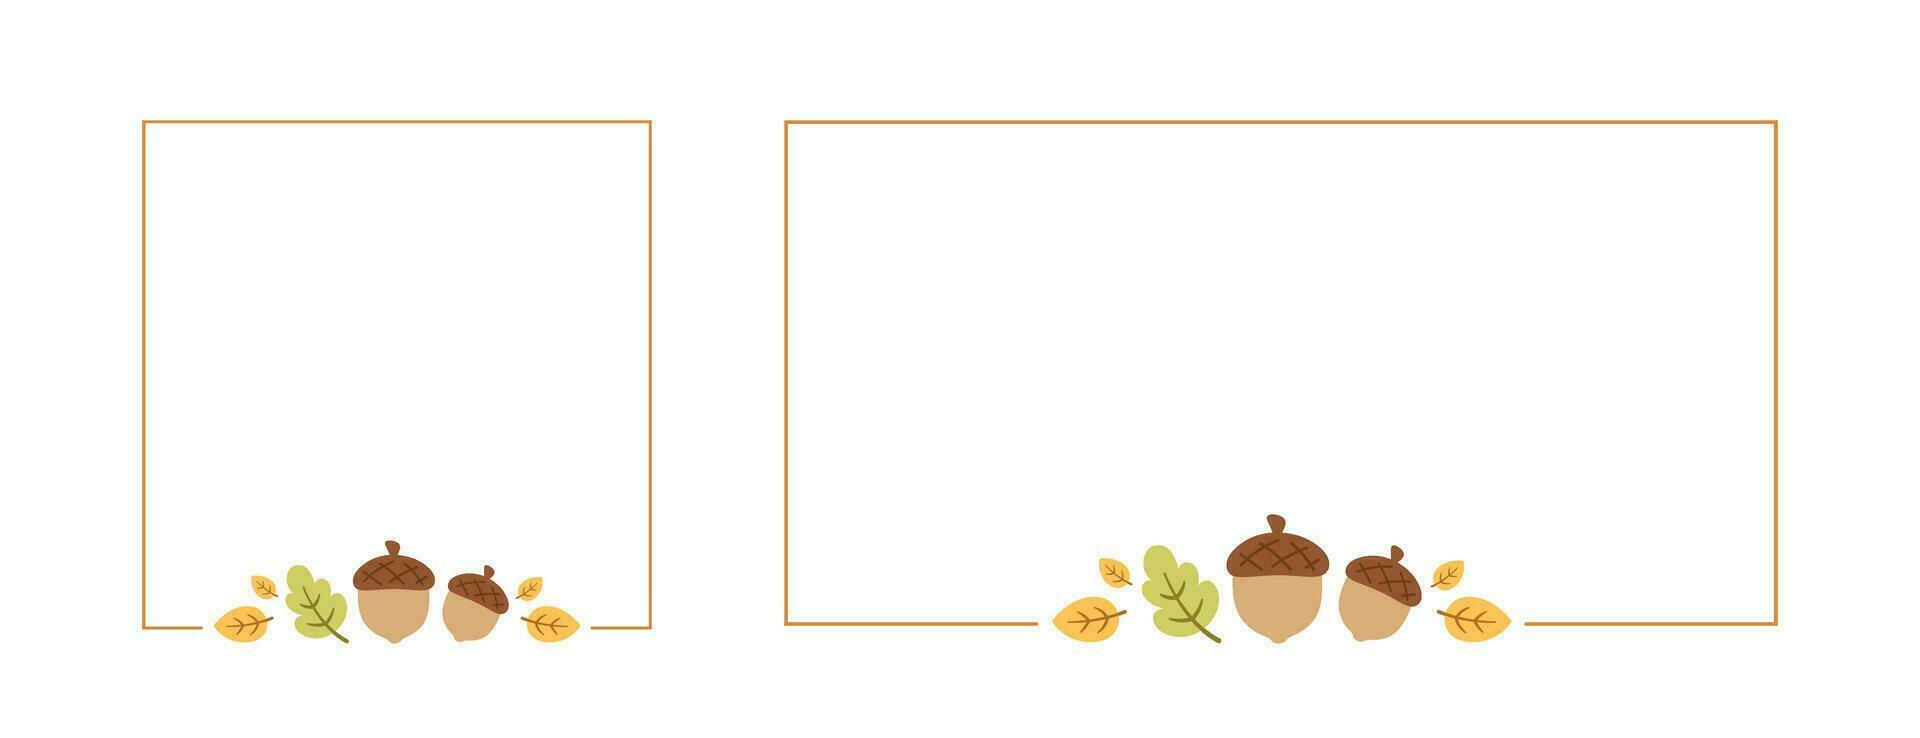 Cute Spring Frame Border Template Set. Can be used for shopping sale, promo poster, banner, flyer, invitation, website or greeting card. Vector illustration